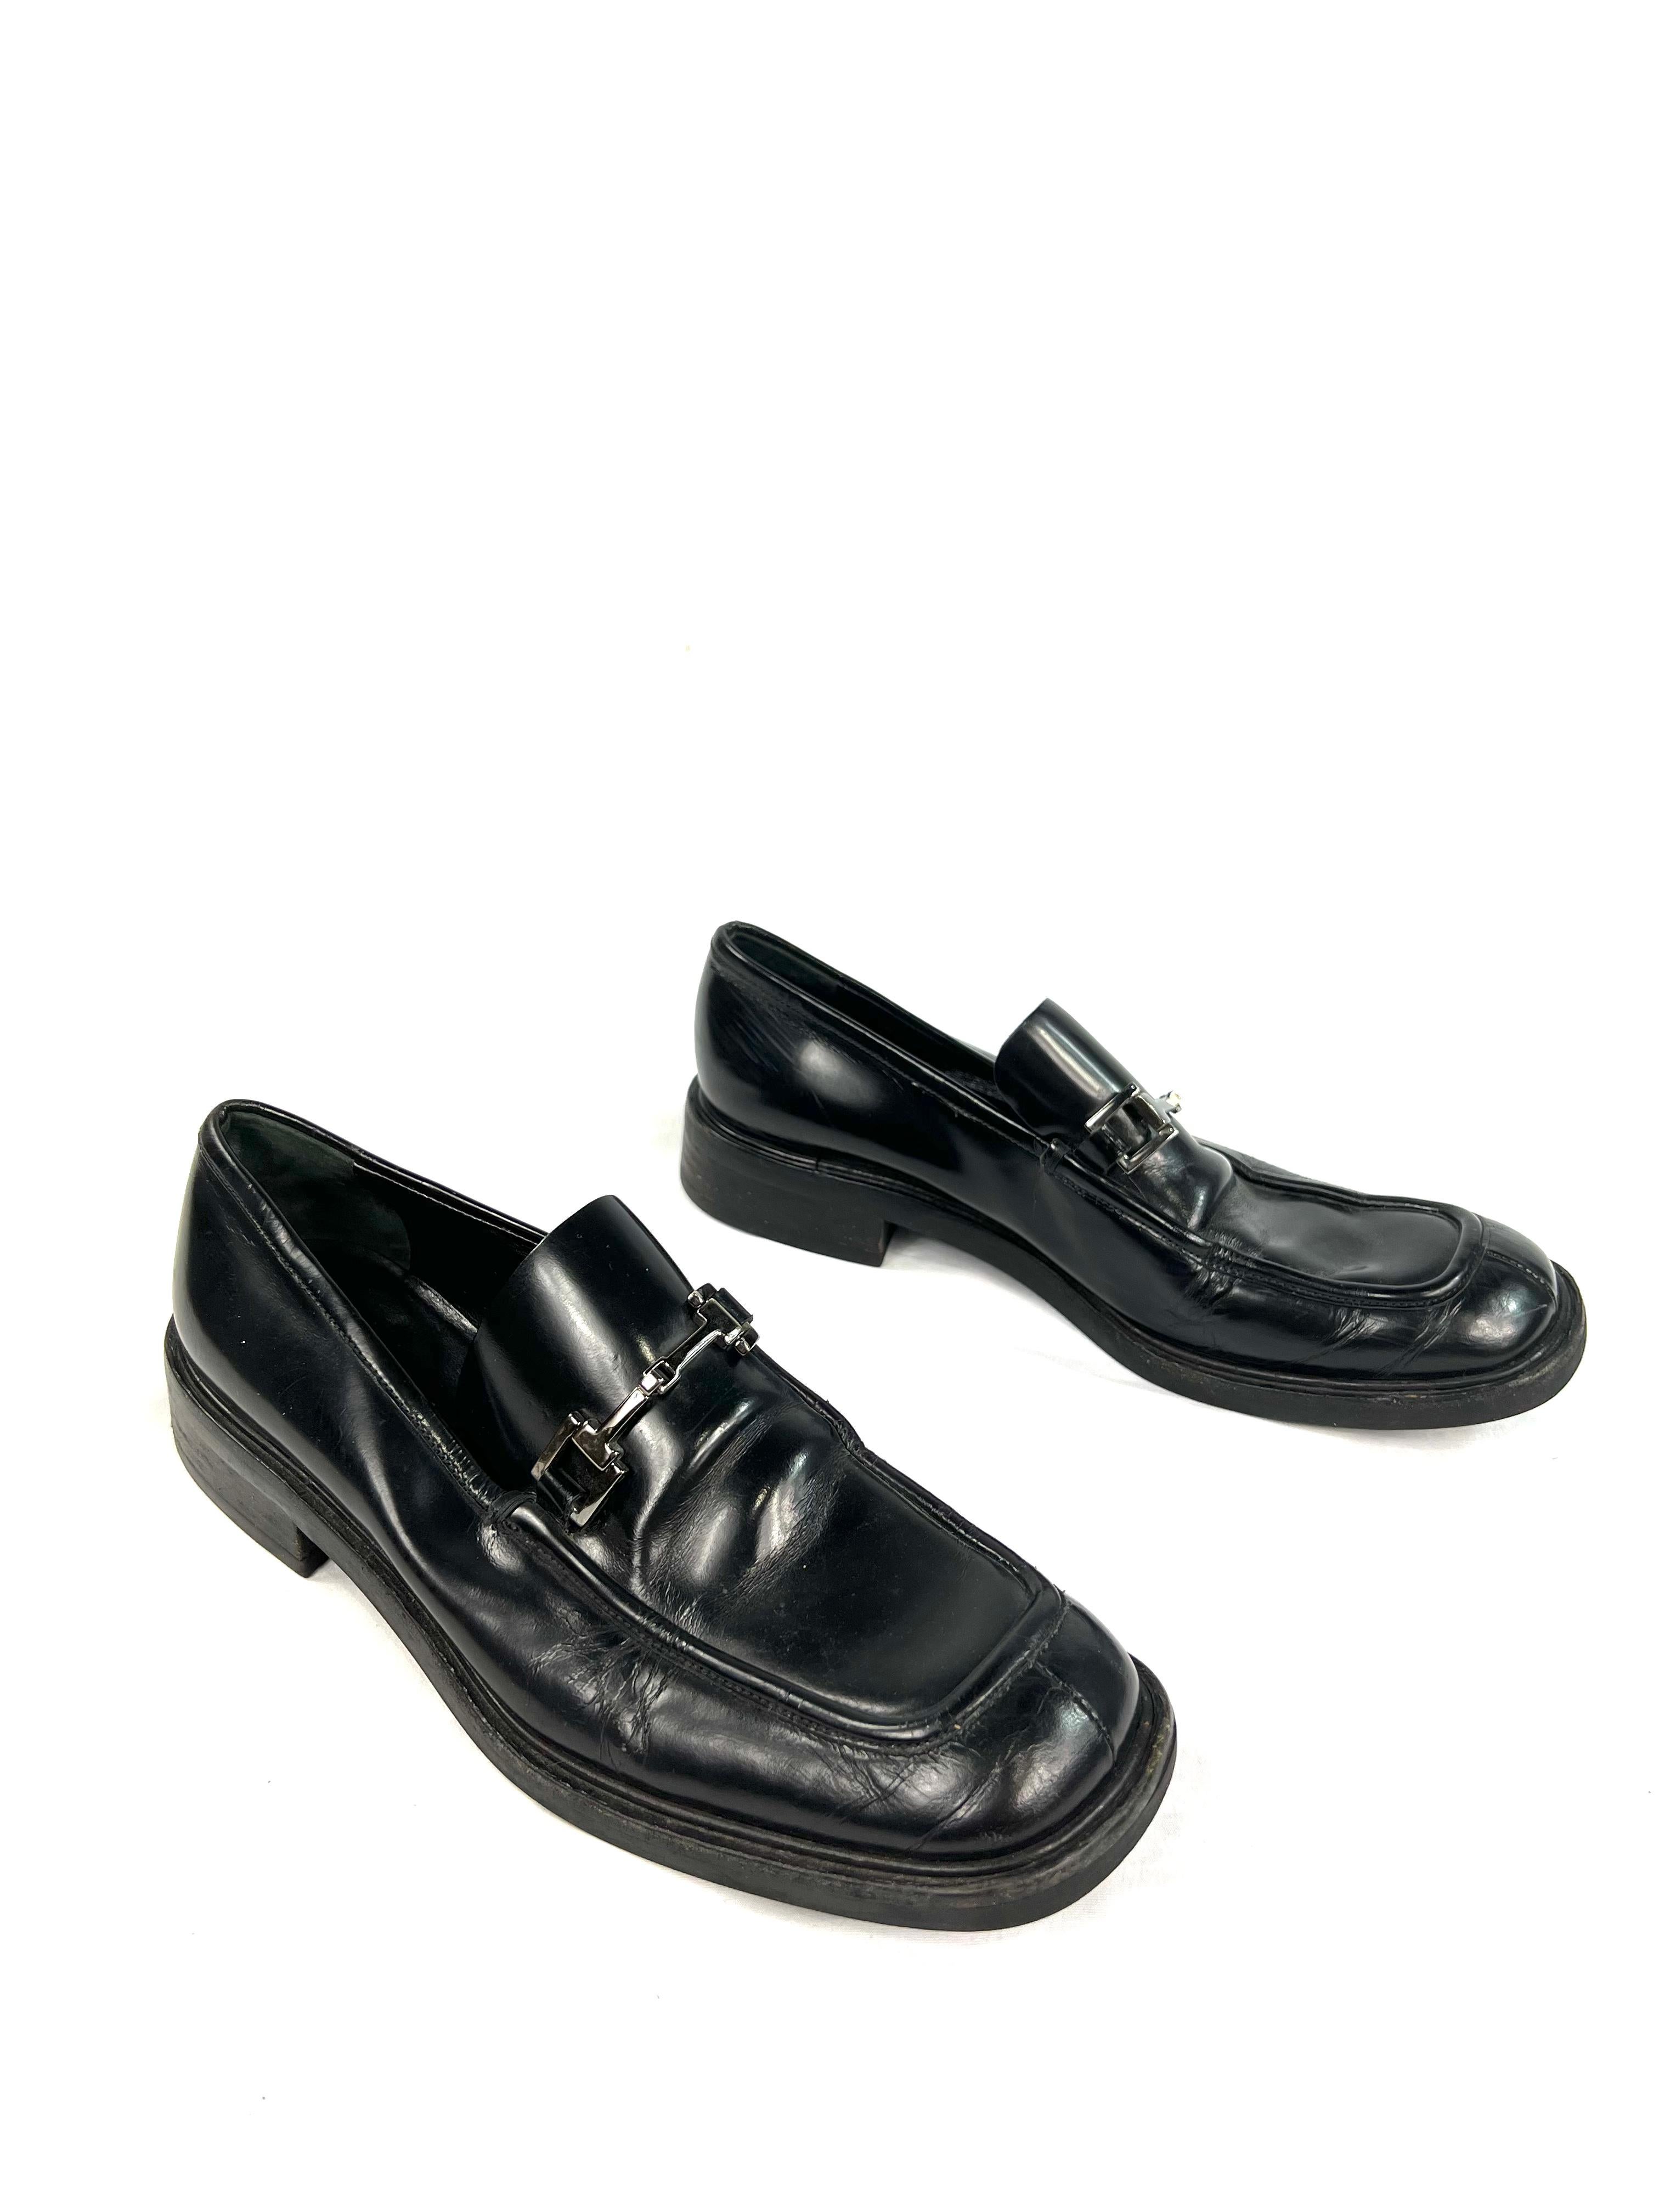 Product details:

The loafers designed by Gucci, it is made out of black leather. It features silver tone Horsebit detail. The heel height is 1”.